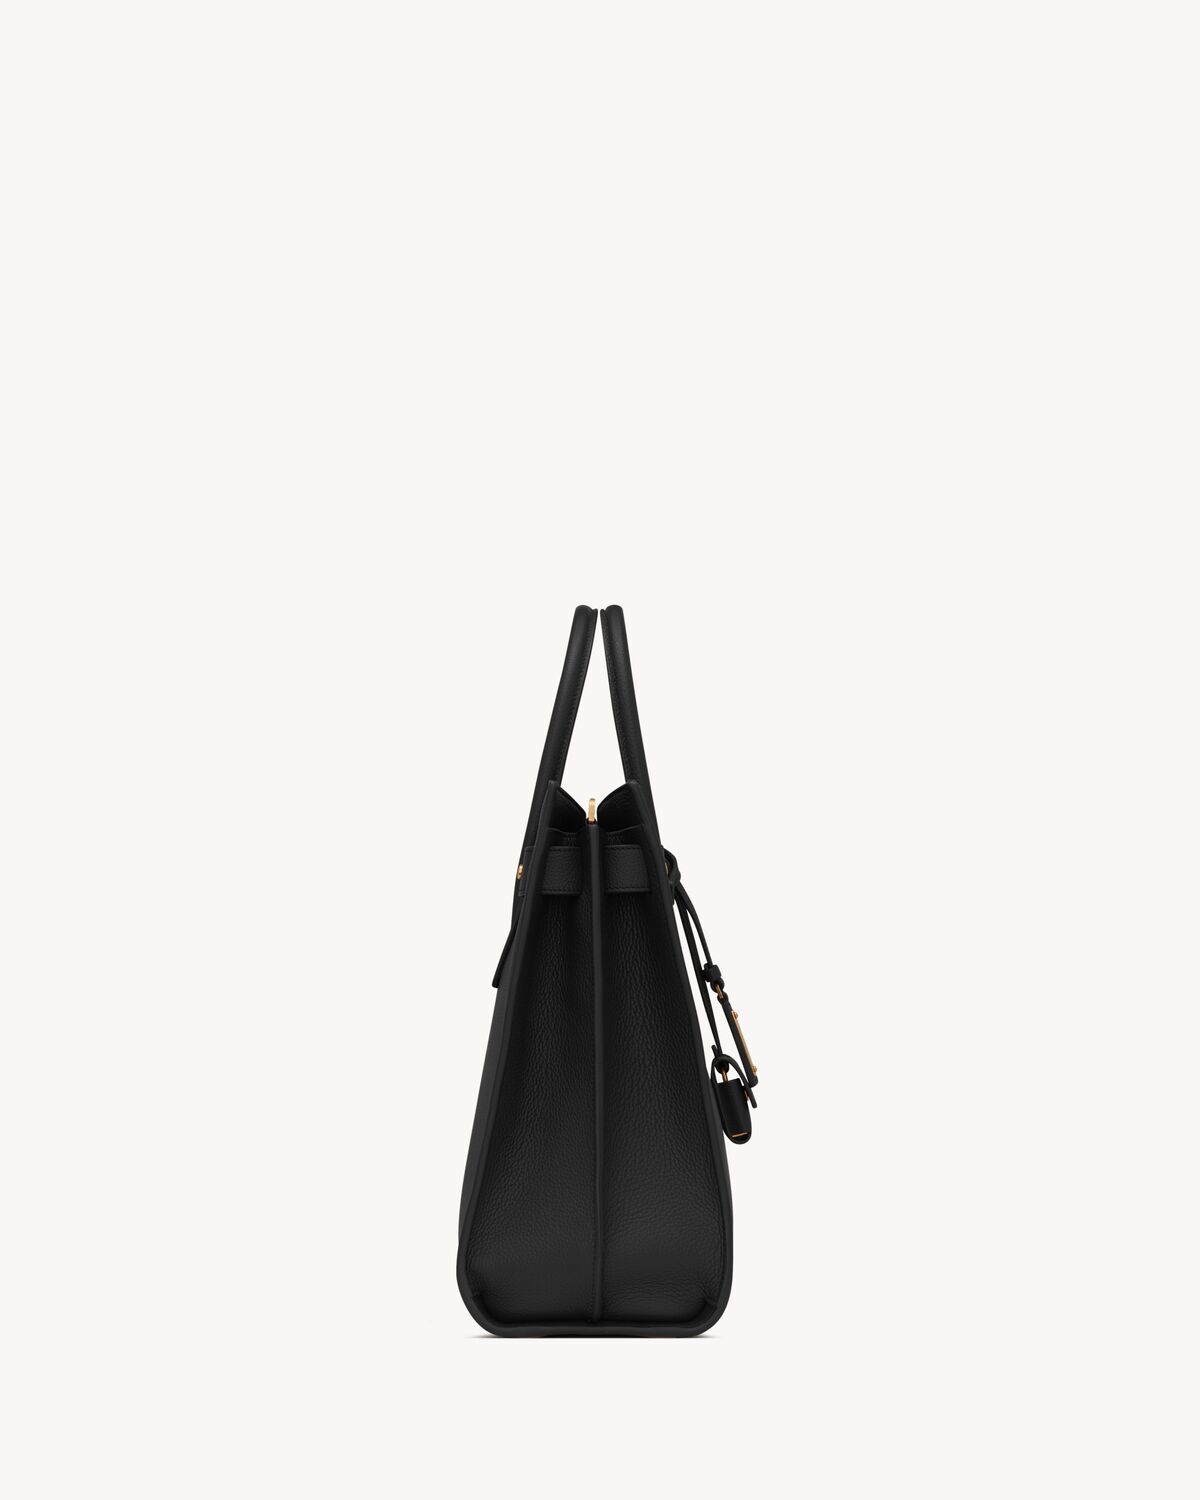 Sac de Jour thin large in grained leather